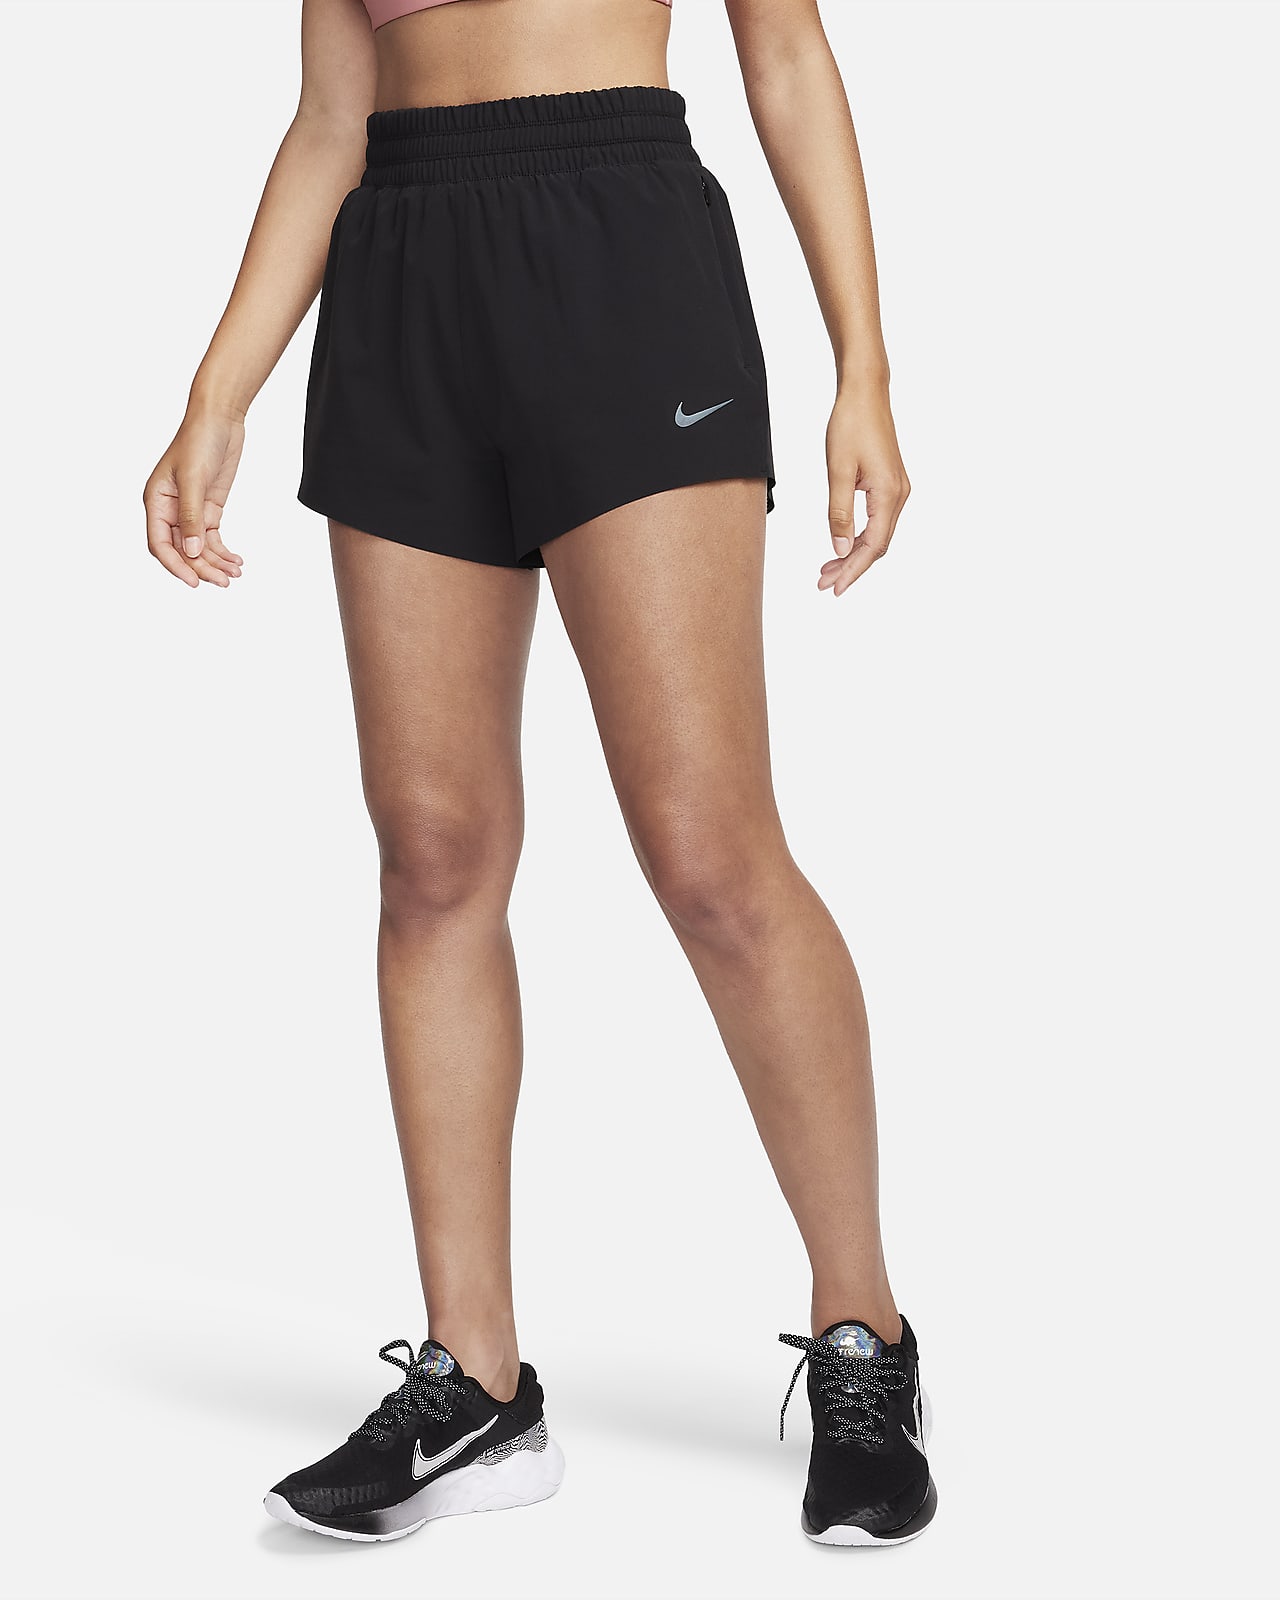 Nike Dri-FIT Running Division Women's High-Waisted 7.5cm (approx.)  Brief-Lined Running Shorts with Pockets. Nike LU